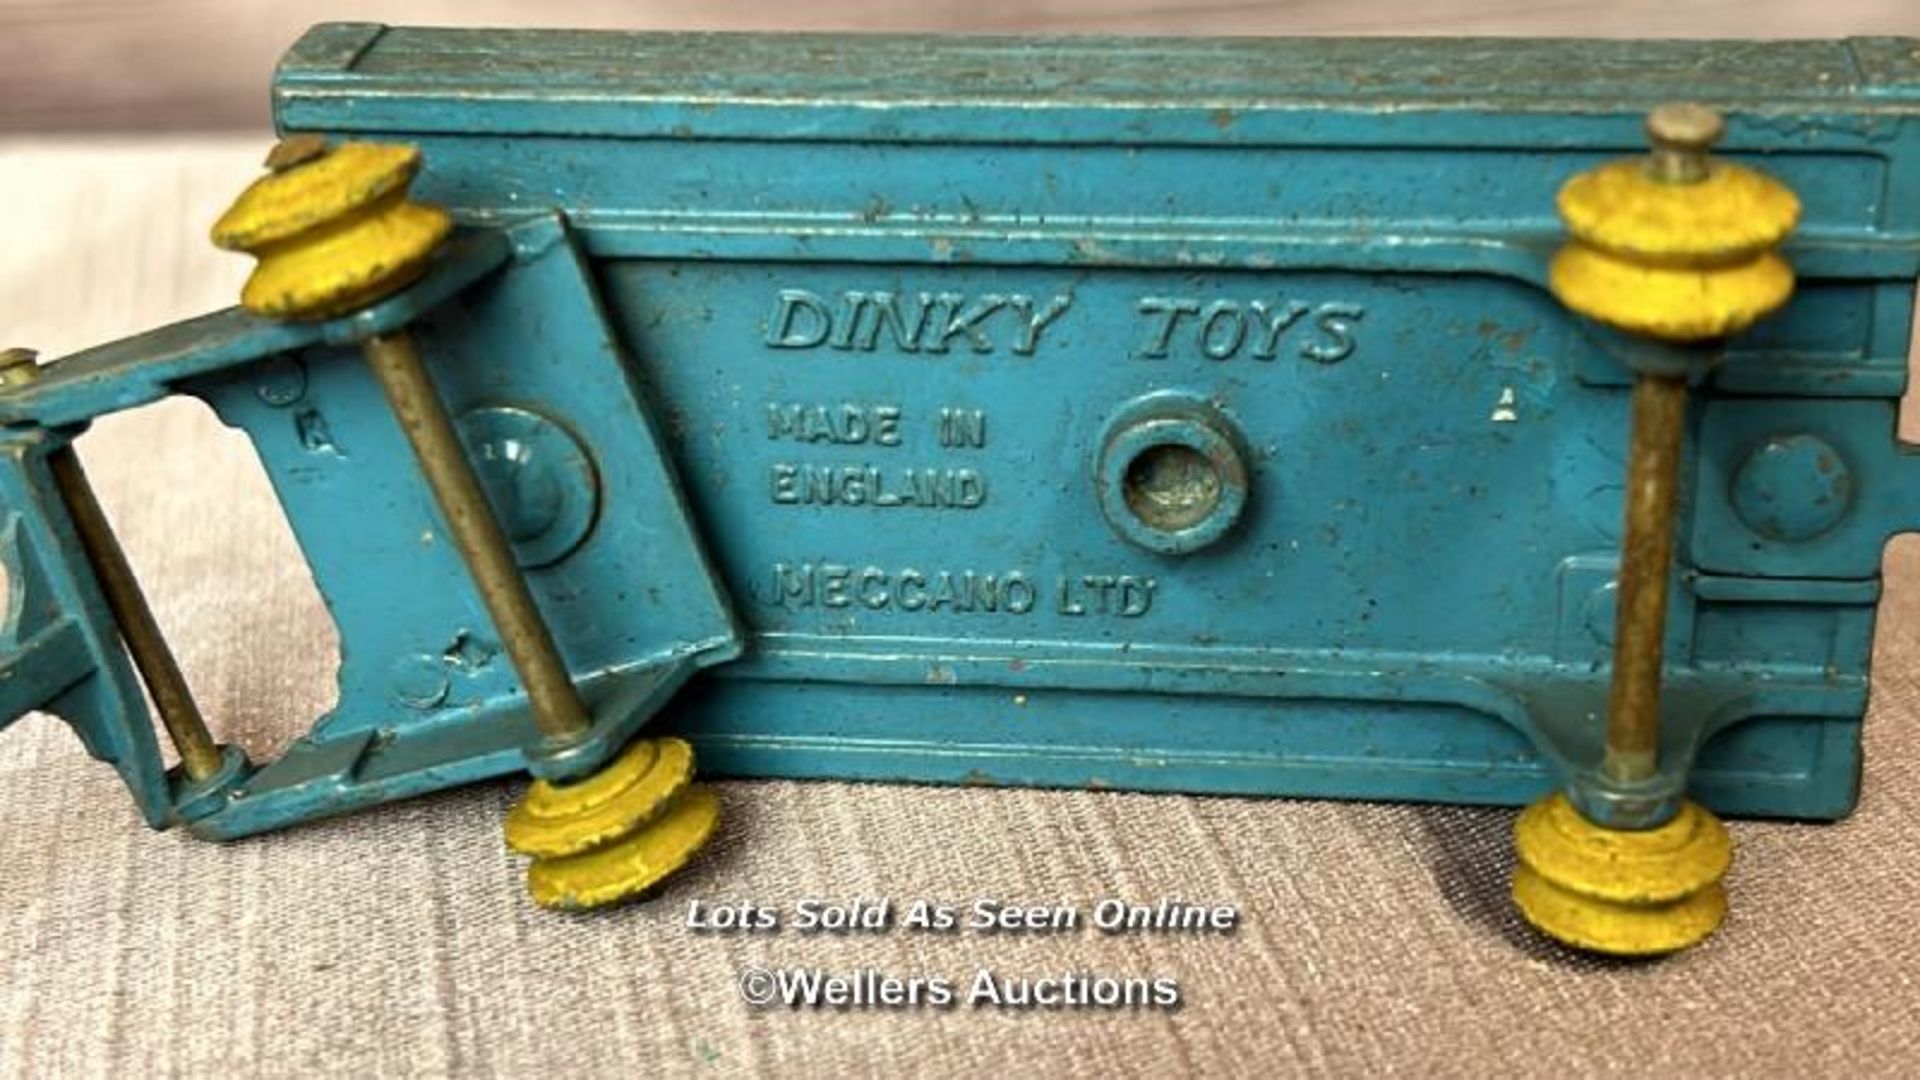 FIVE ASSORTED DINKY TRAILERS INCLUDING THE B.E.V. TRUCK - Image 10 of 10